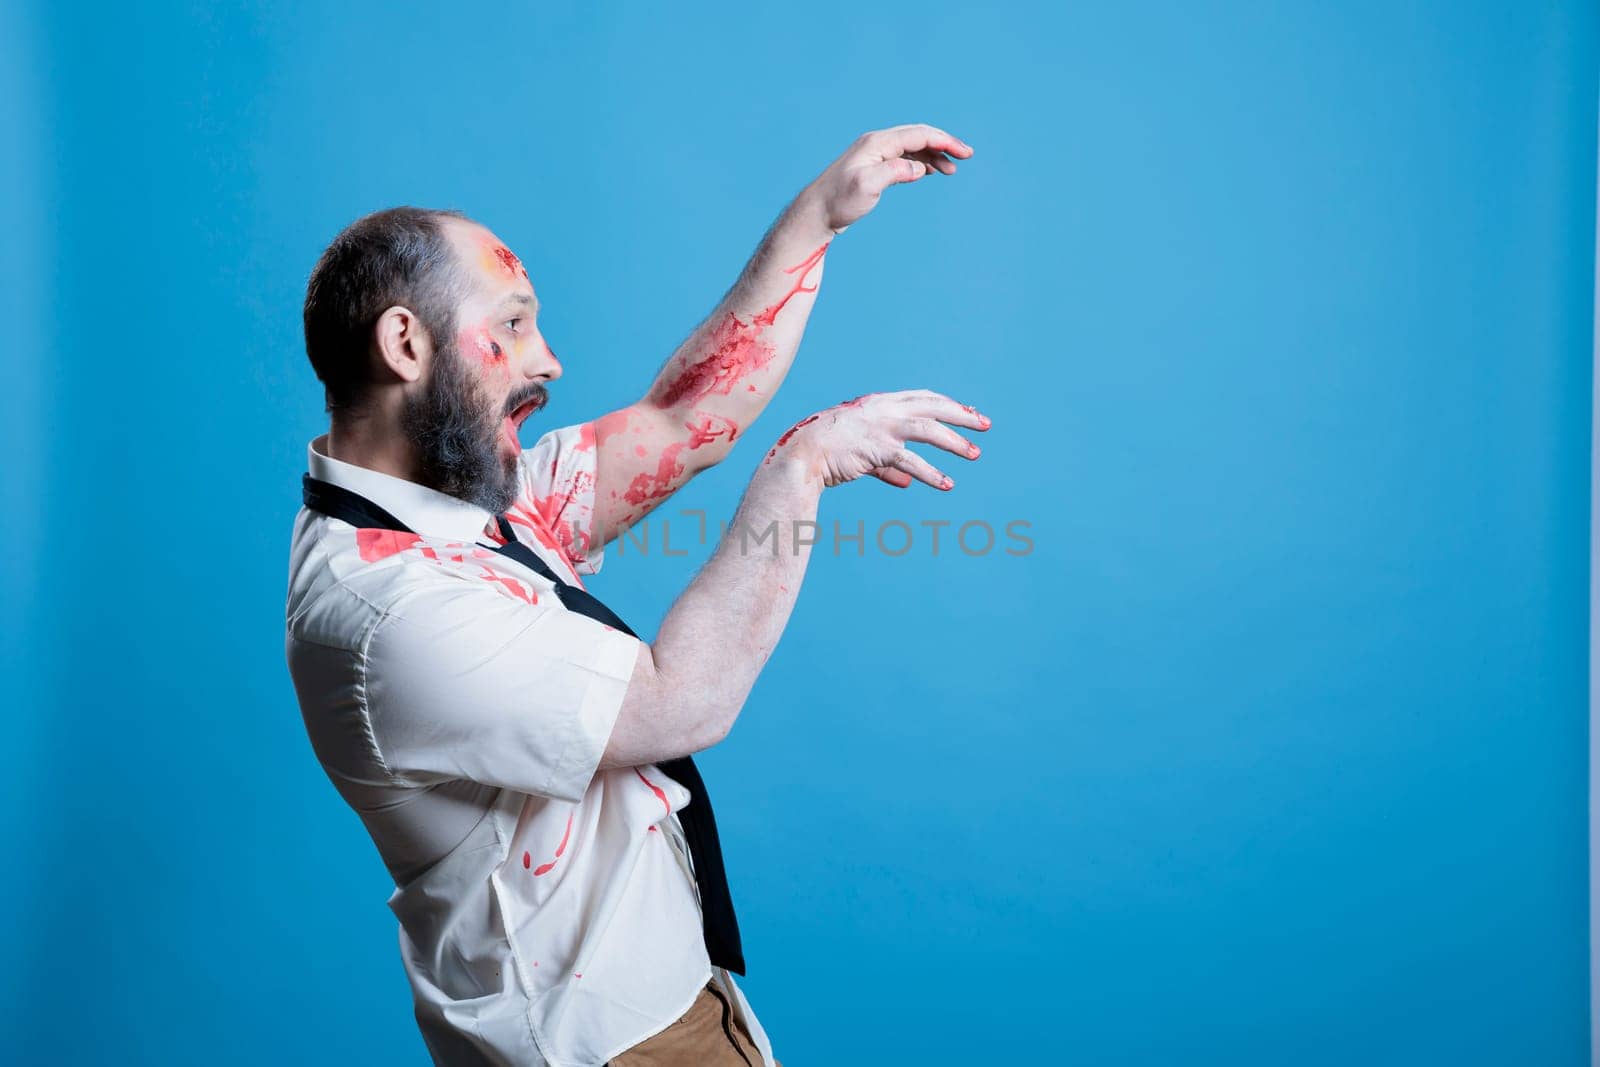 Possessed man covered in blood turned into zombie after being killed, haunting place. Wounded ghoulish cadaver limply walking towards victim, preparing for attack, studio background